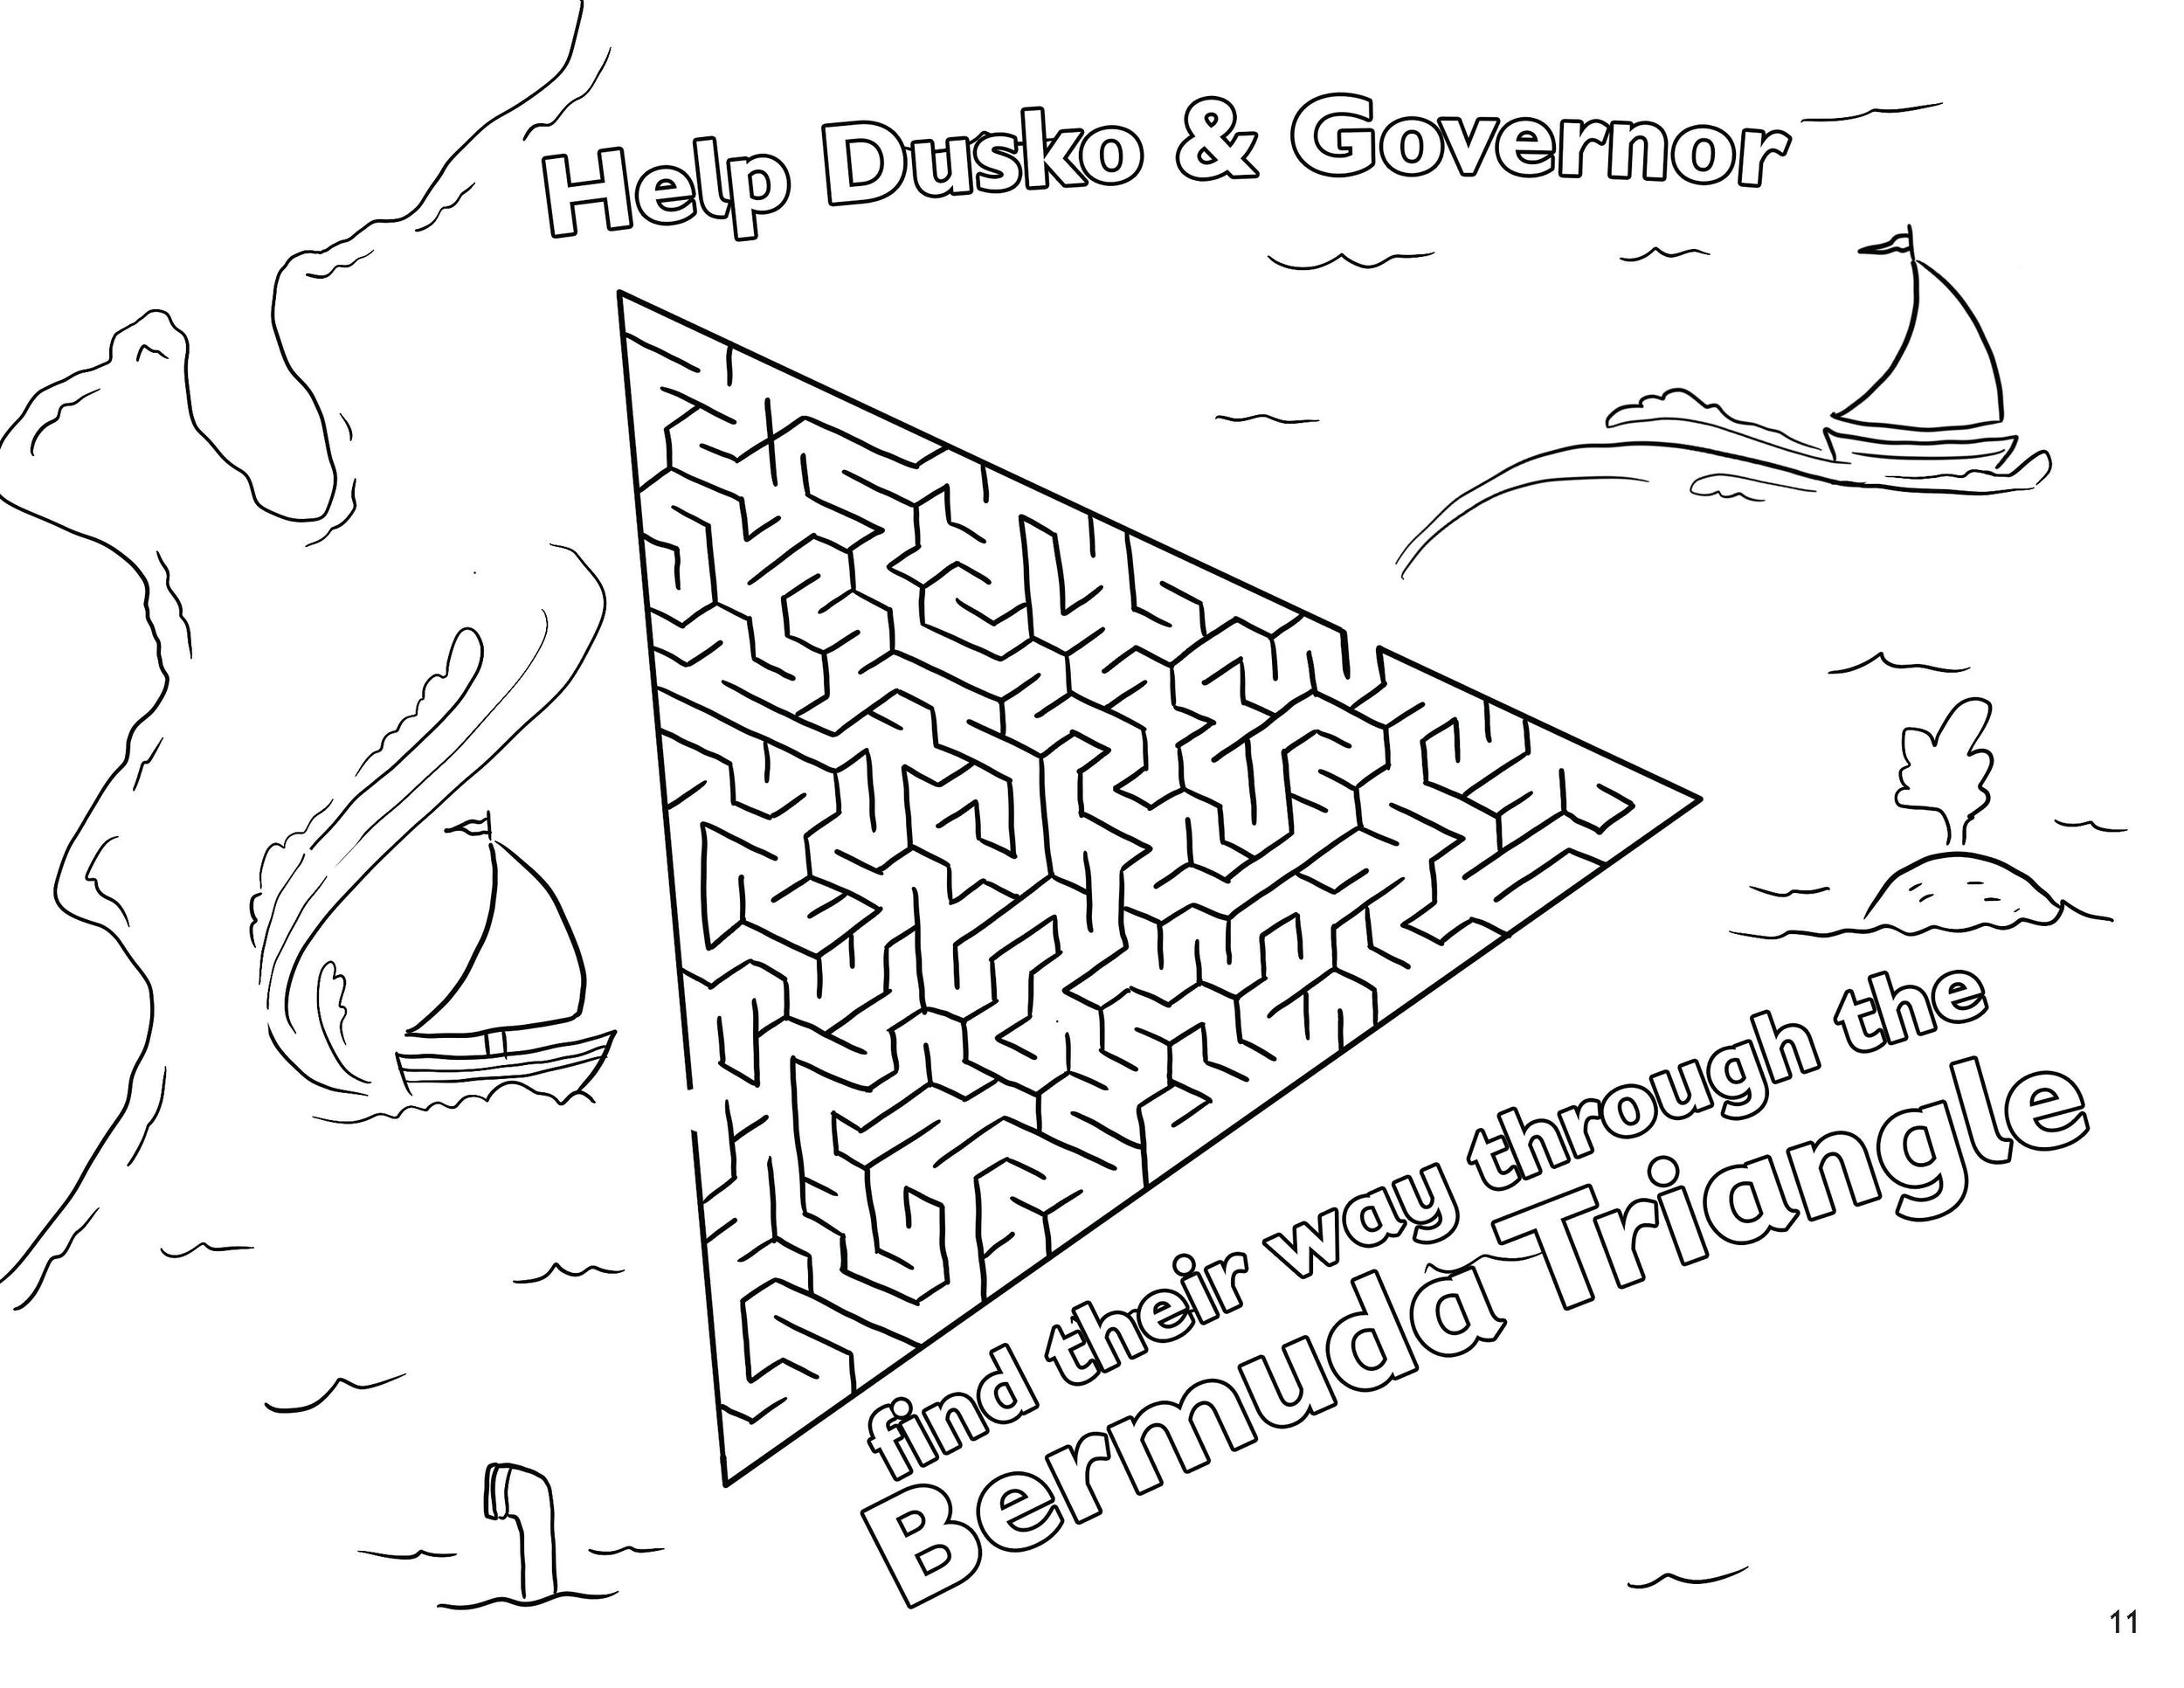 7-14Goes to Sea Coloring book_Page_11.jpg